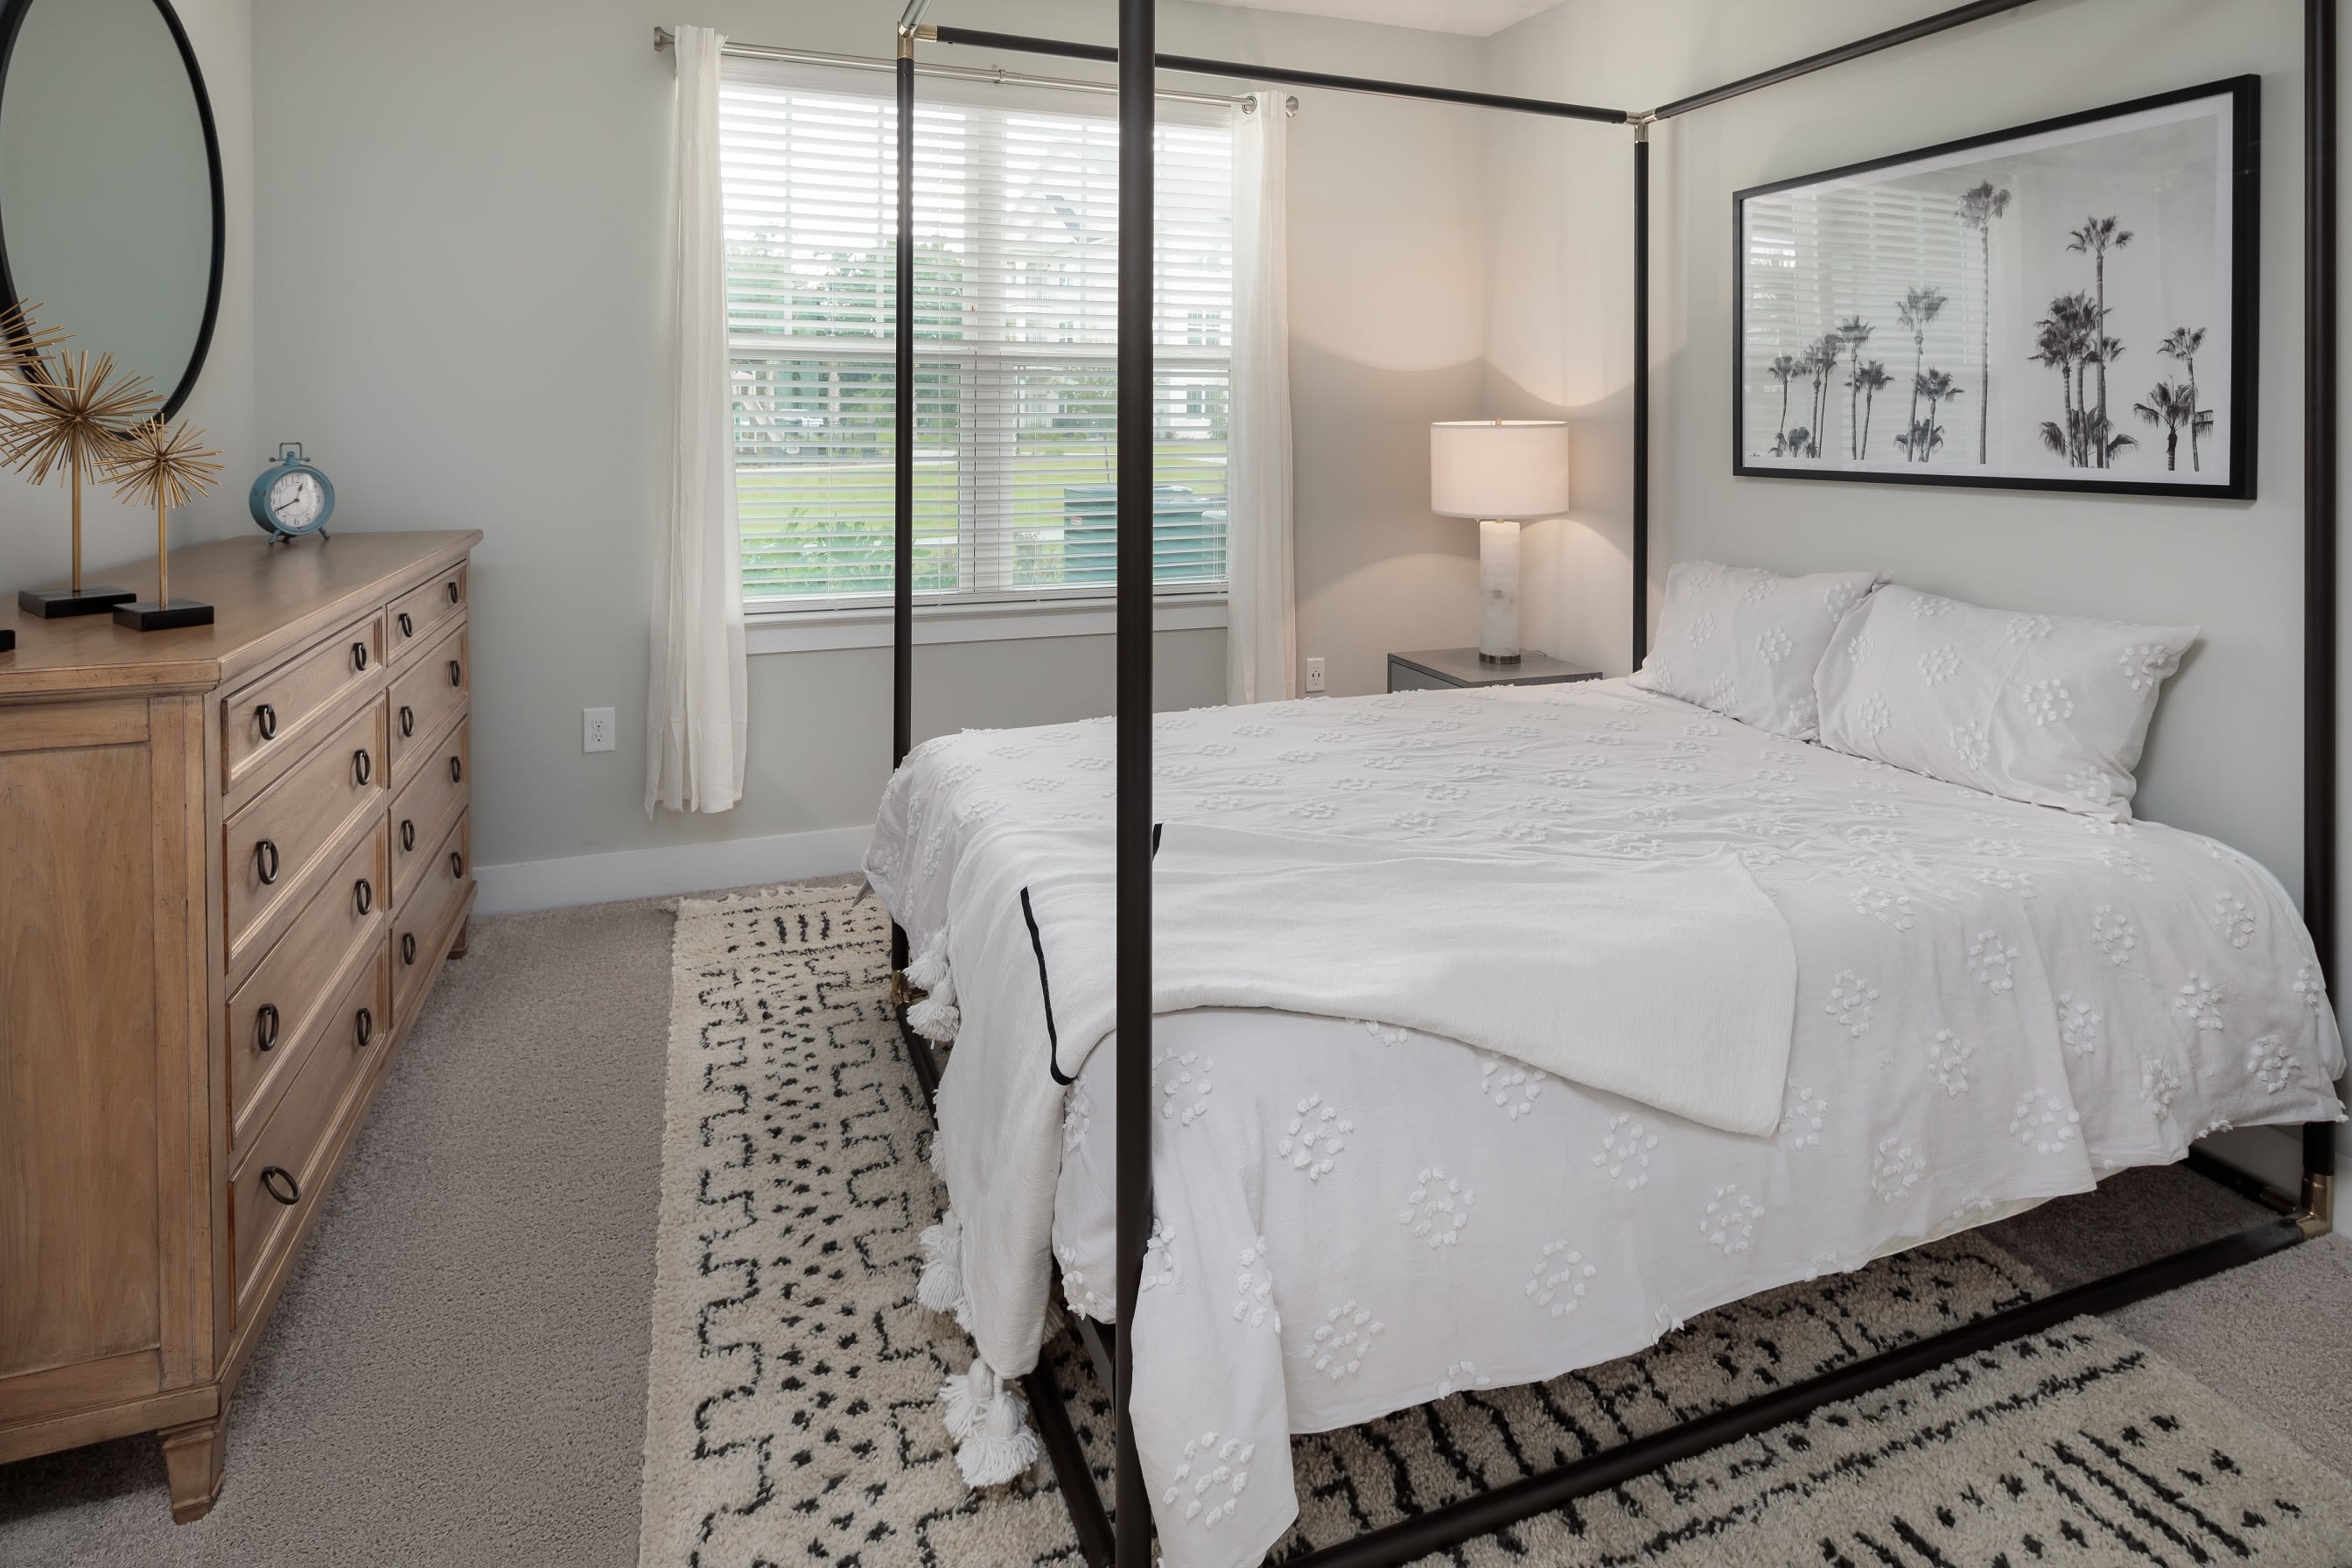 View virtual tour for 2 bedroom 2 bathroom unit at The Mason in Ladson, South Carolina